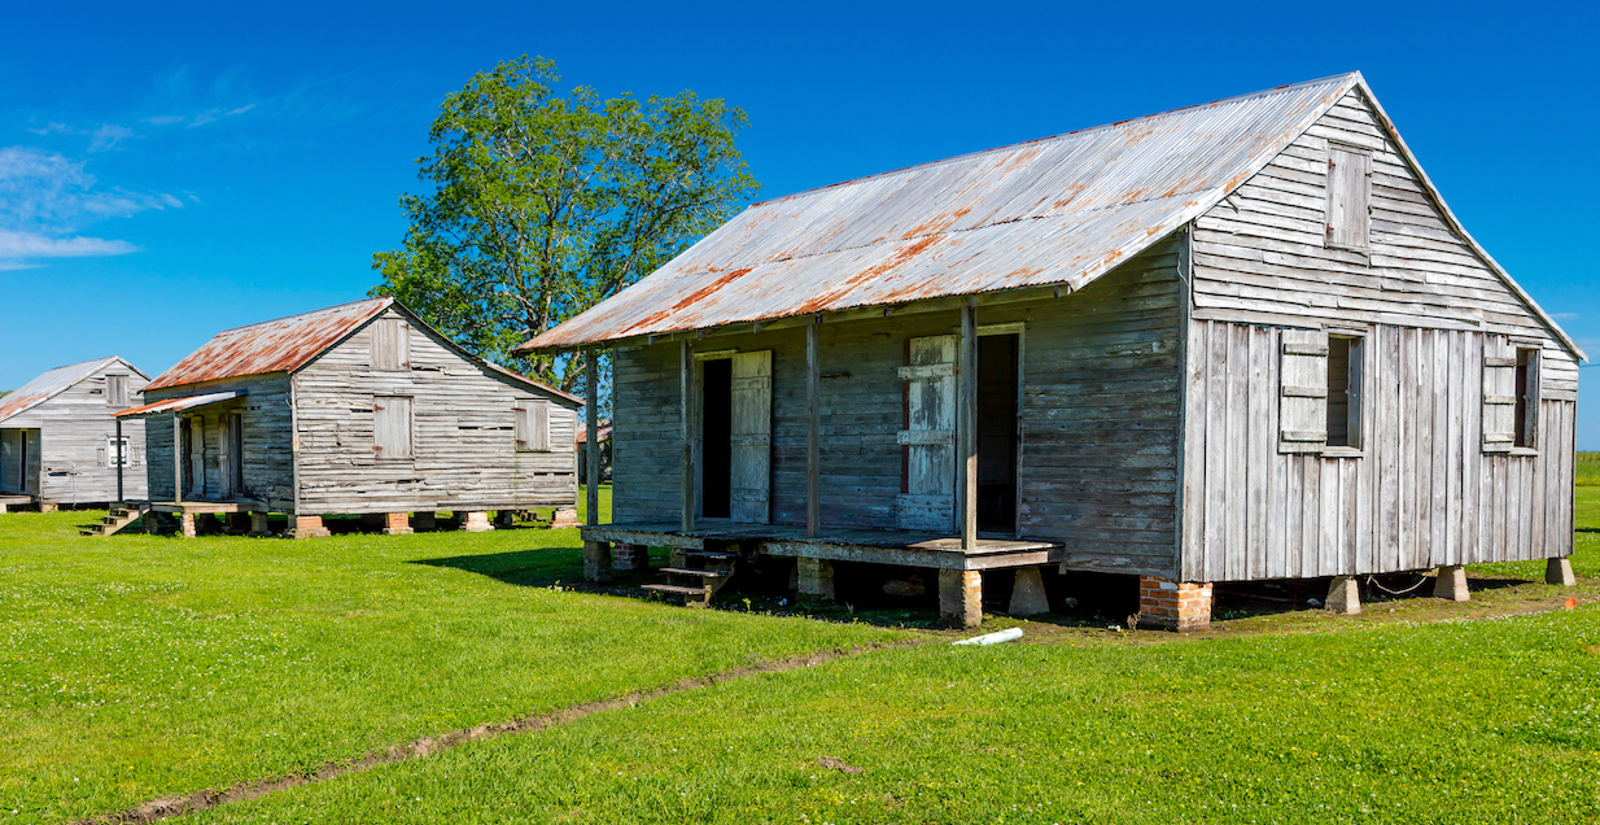 Airbnb Announces Ban on Slave Cabin Rentals (theroot.com)